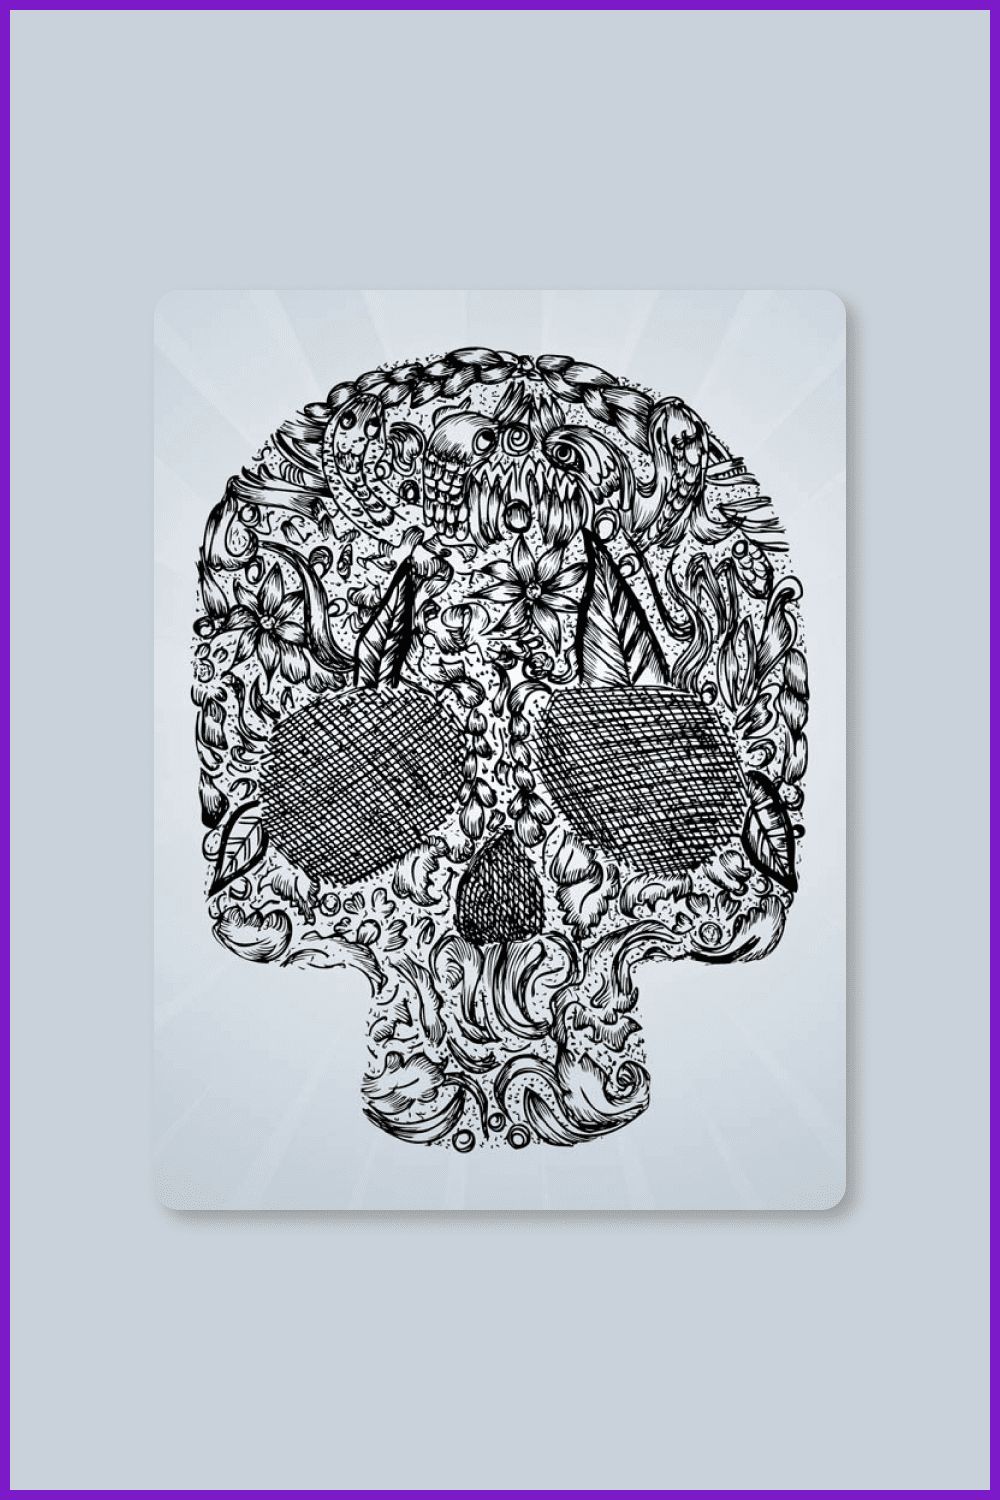 A dead face made out of doodles – flowers, plants, leaves, abstract lines, characters, animals, and circles.